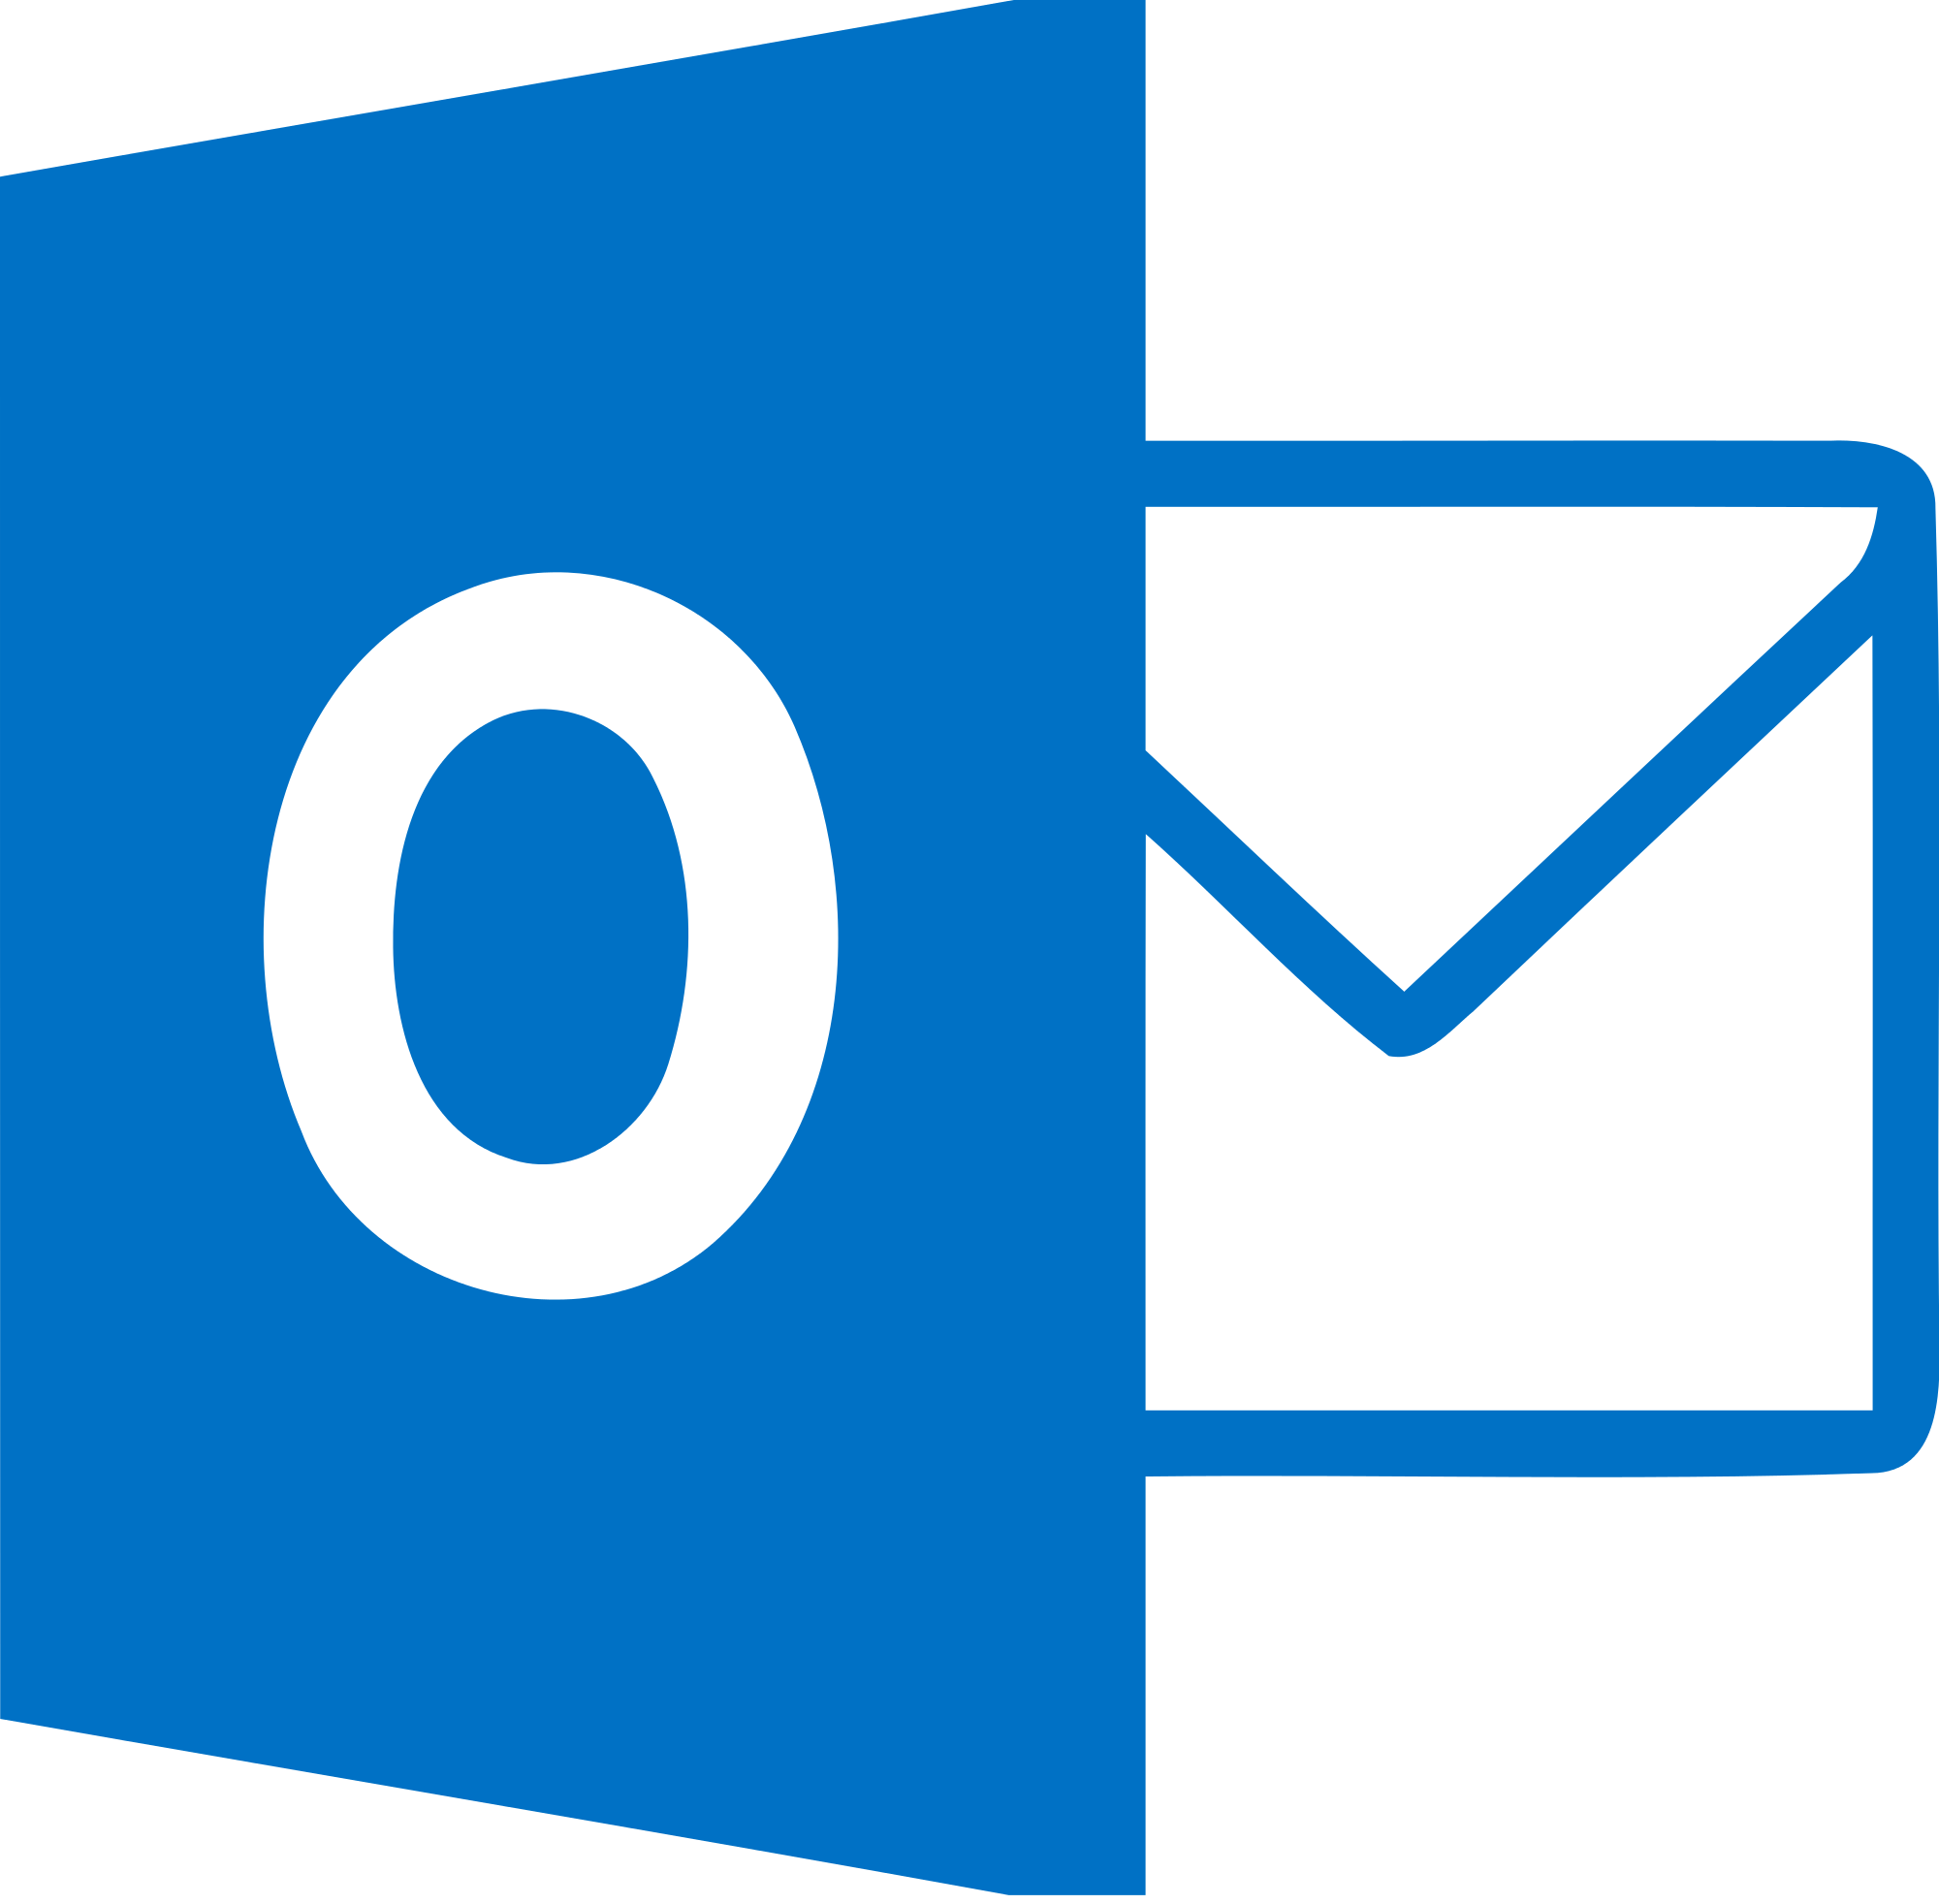 Outlook Contacts